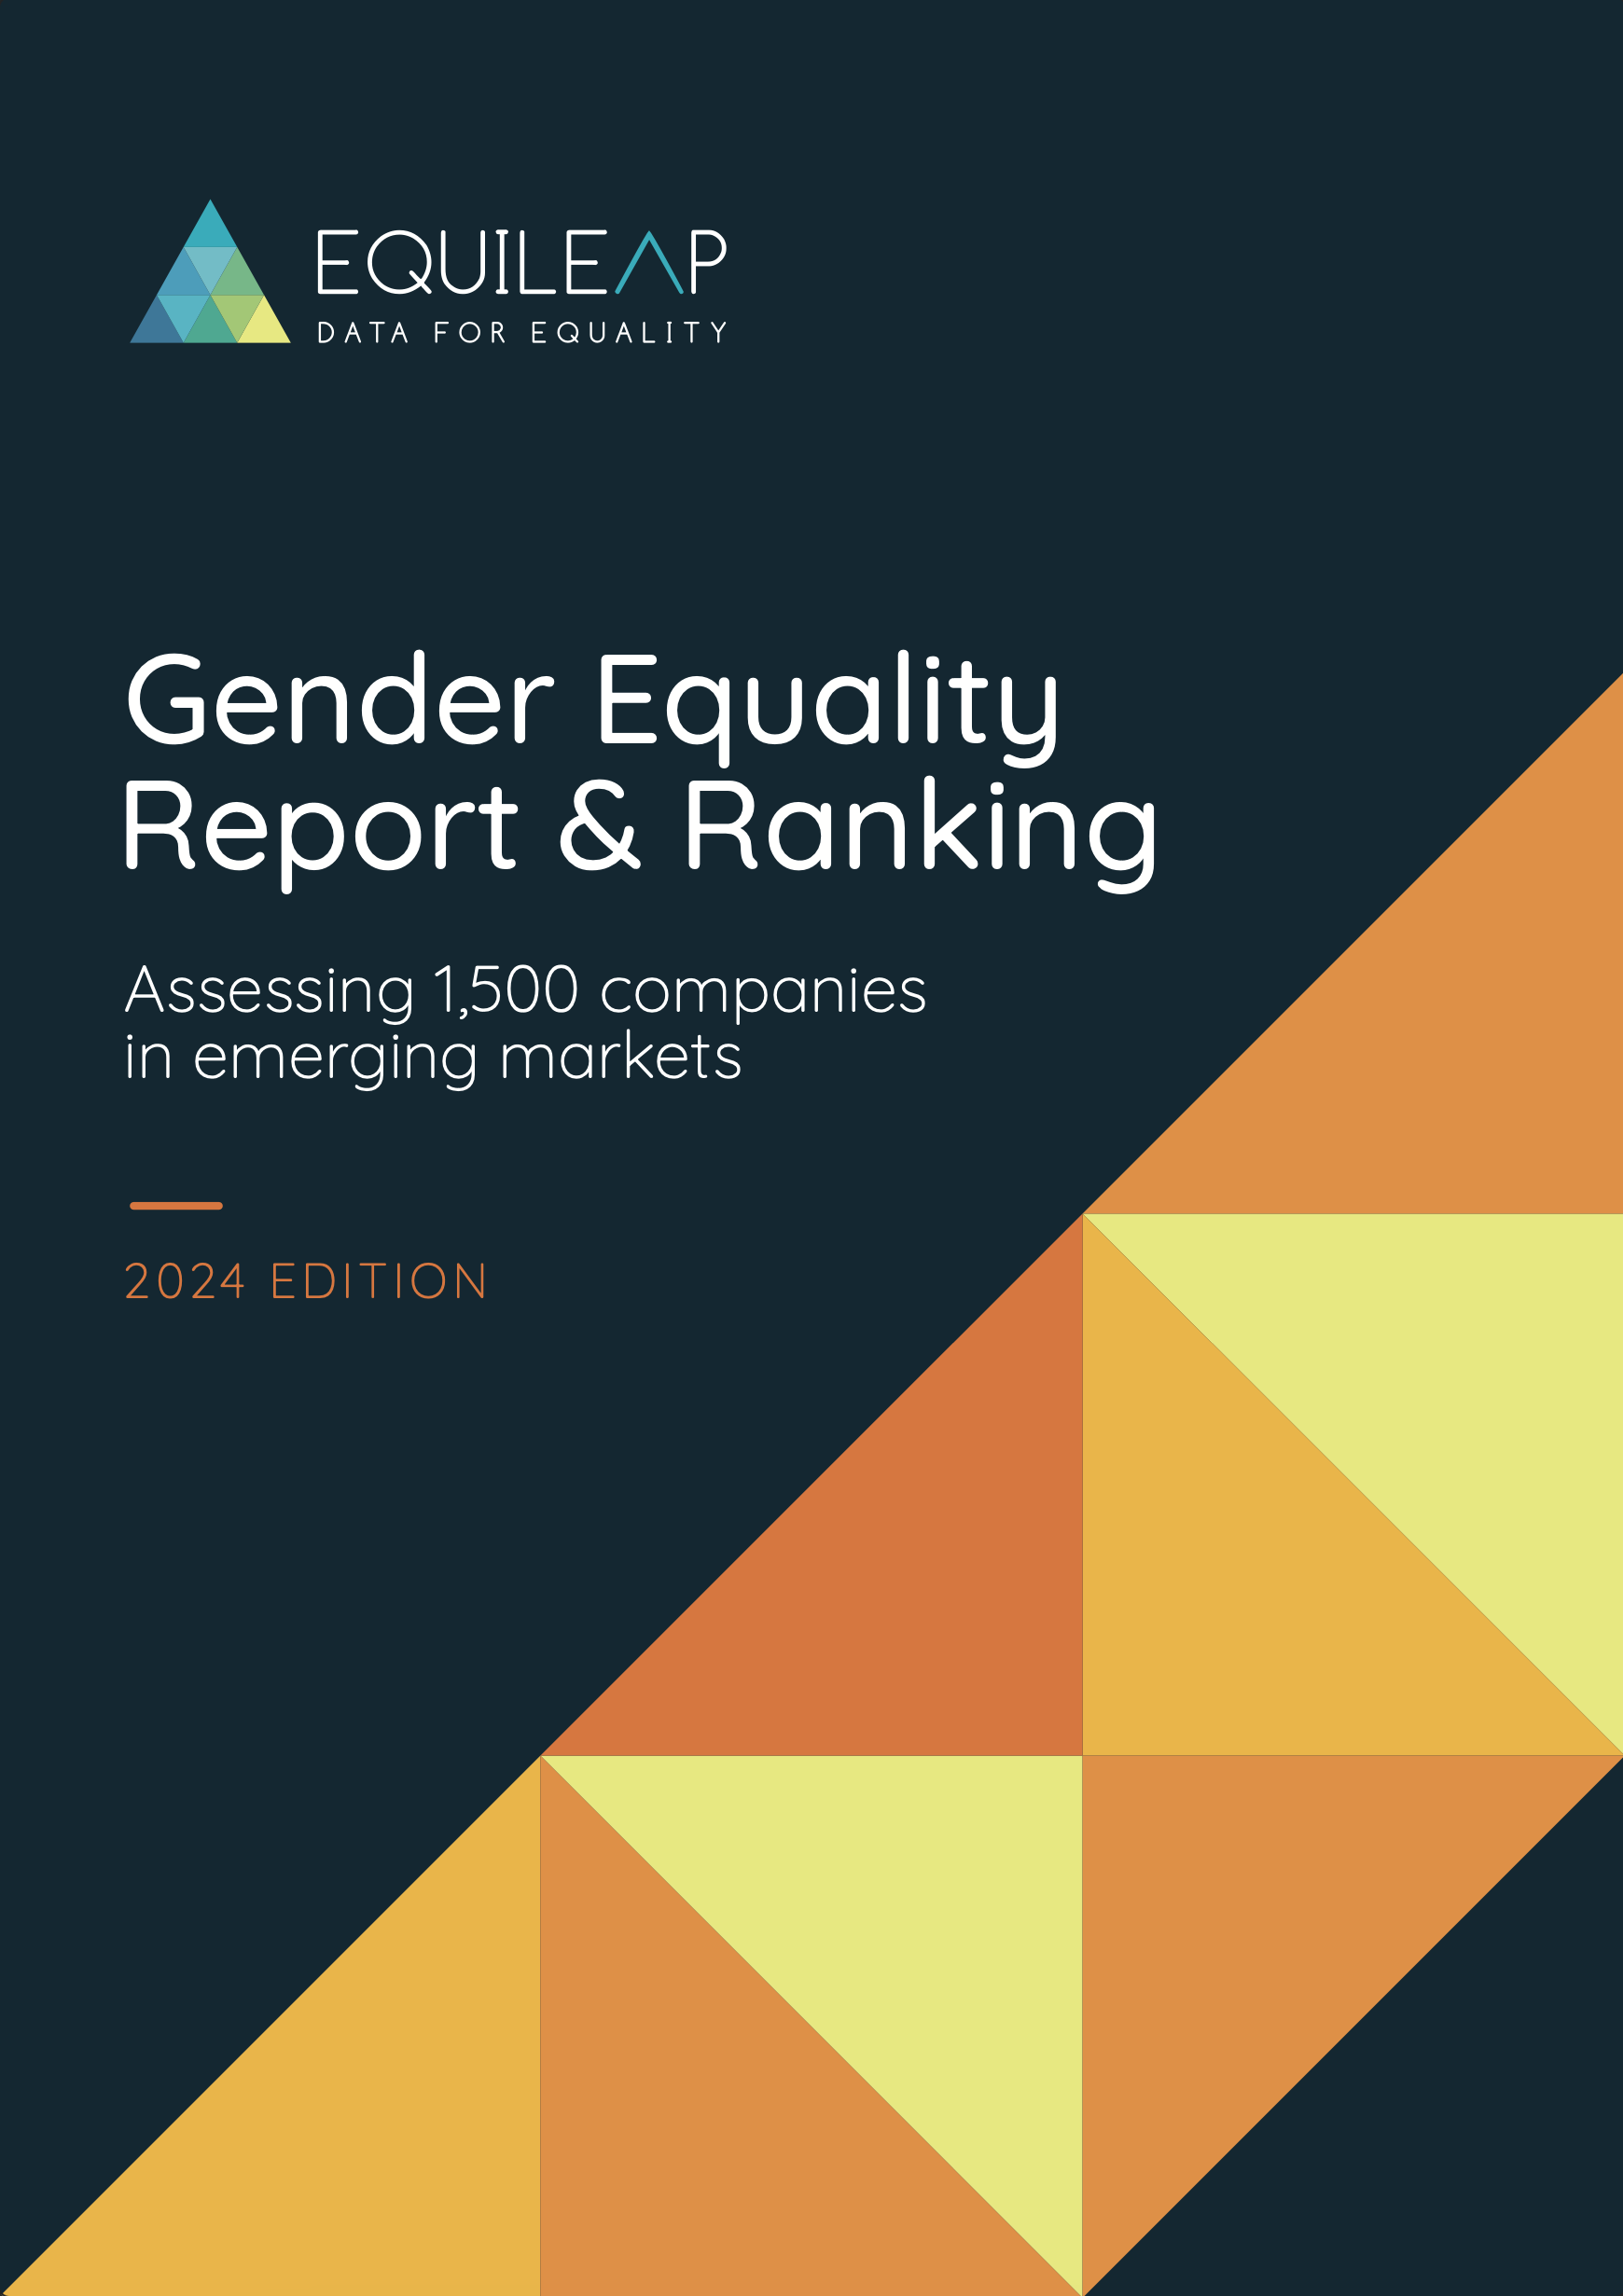 Gender Equality Report & Ranking Assessing 1,500 companies in emerging markets